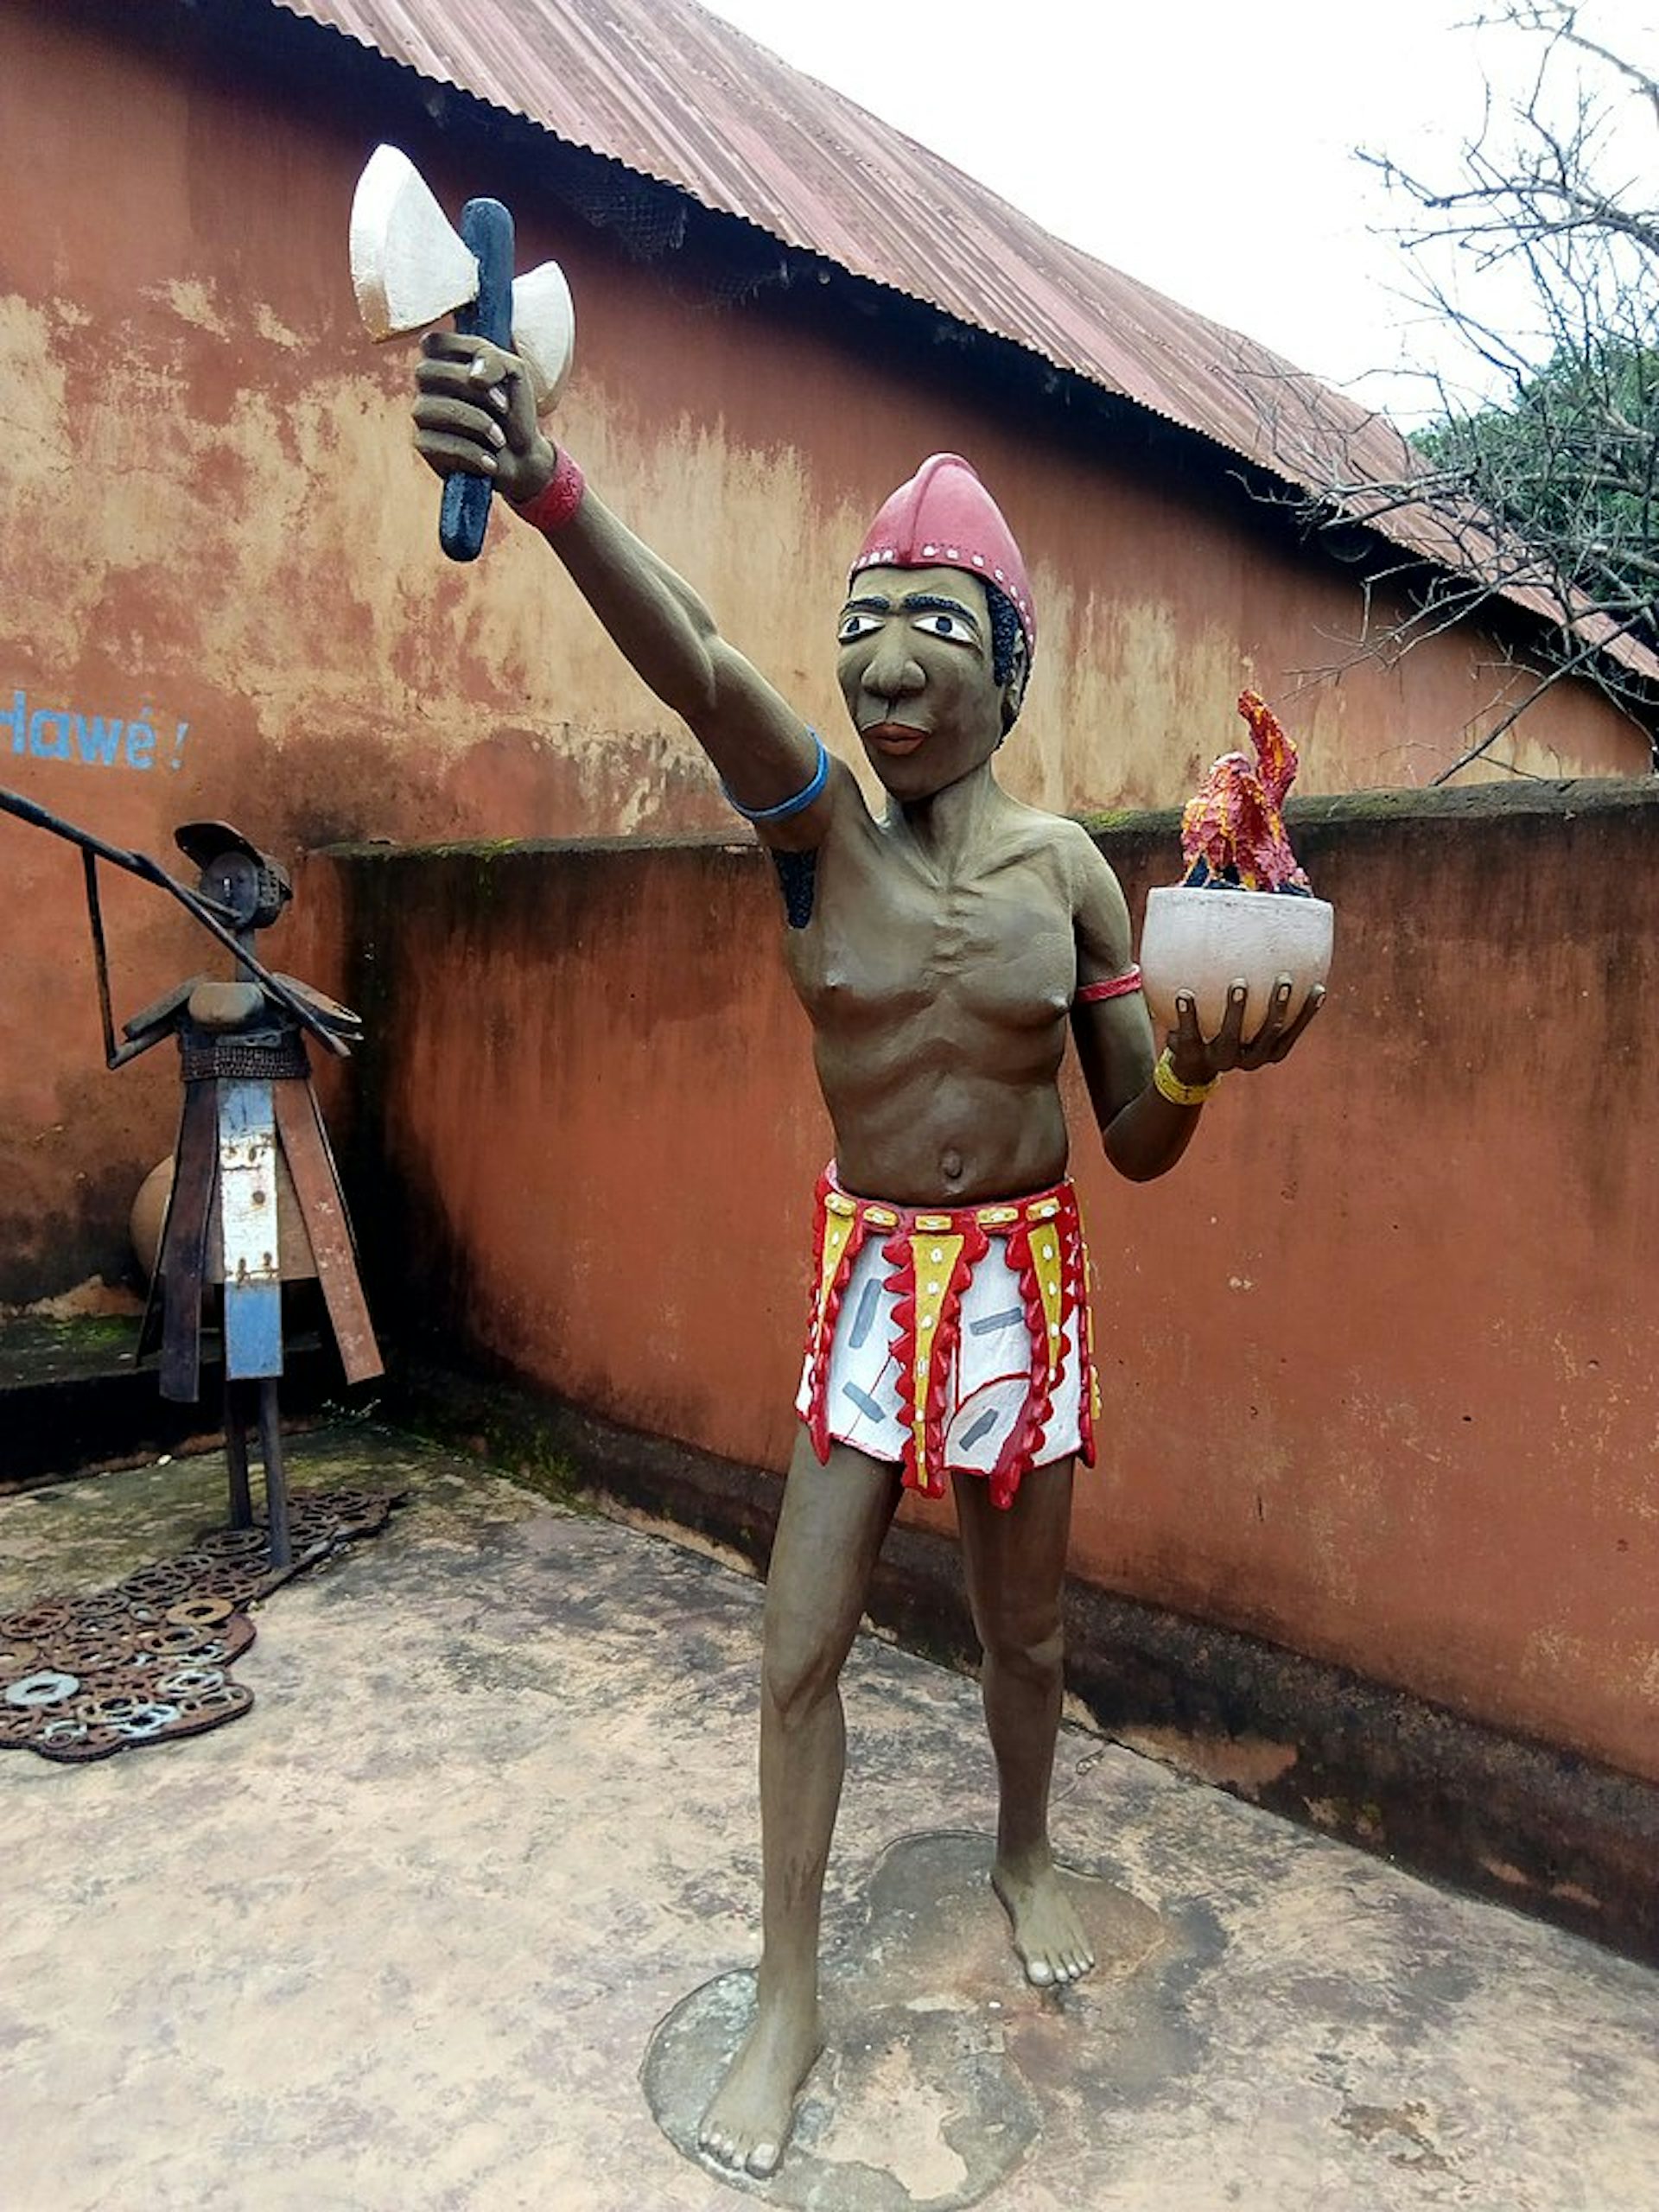 A Representation of Hevioso (Sogbo) photographed by Rachad Sanoussi, (2019).